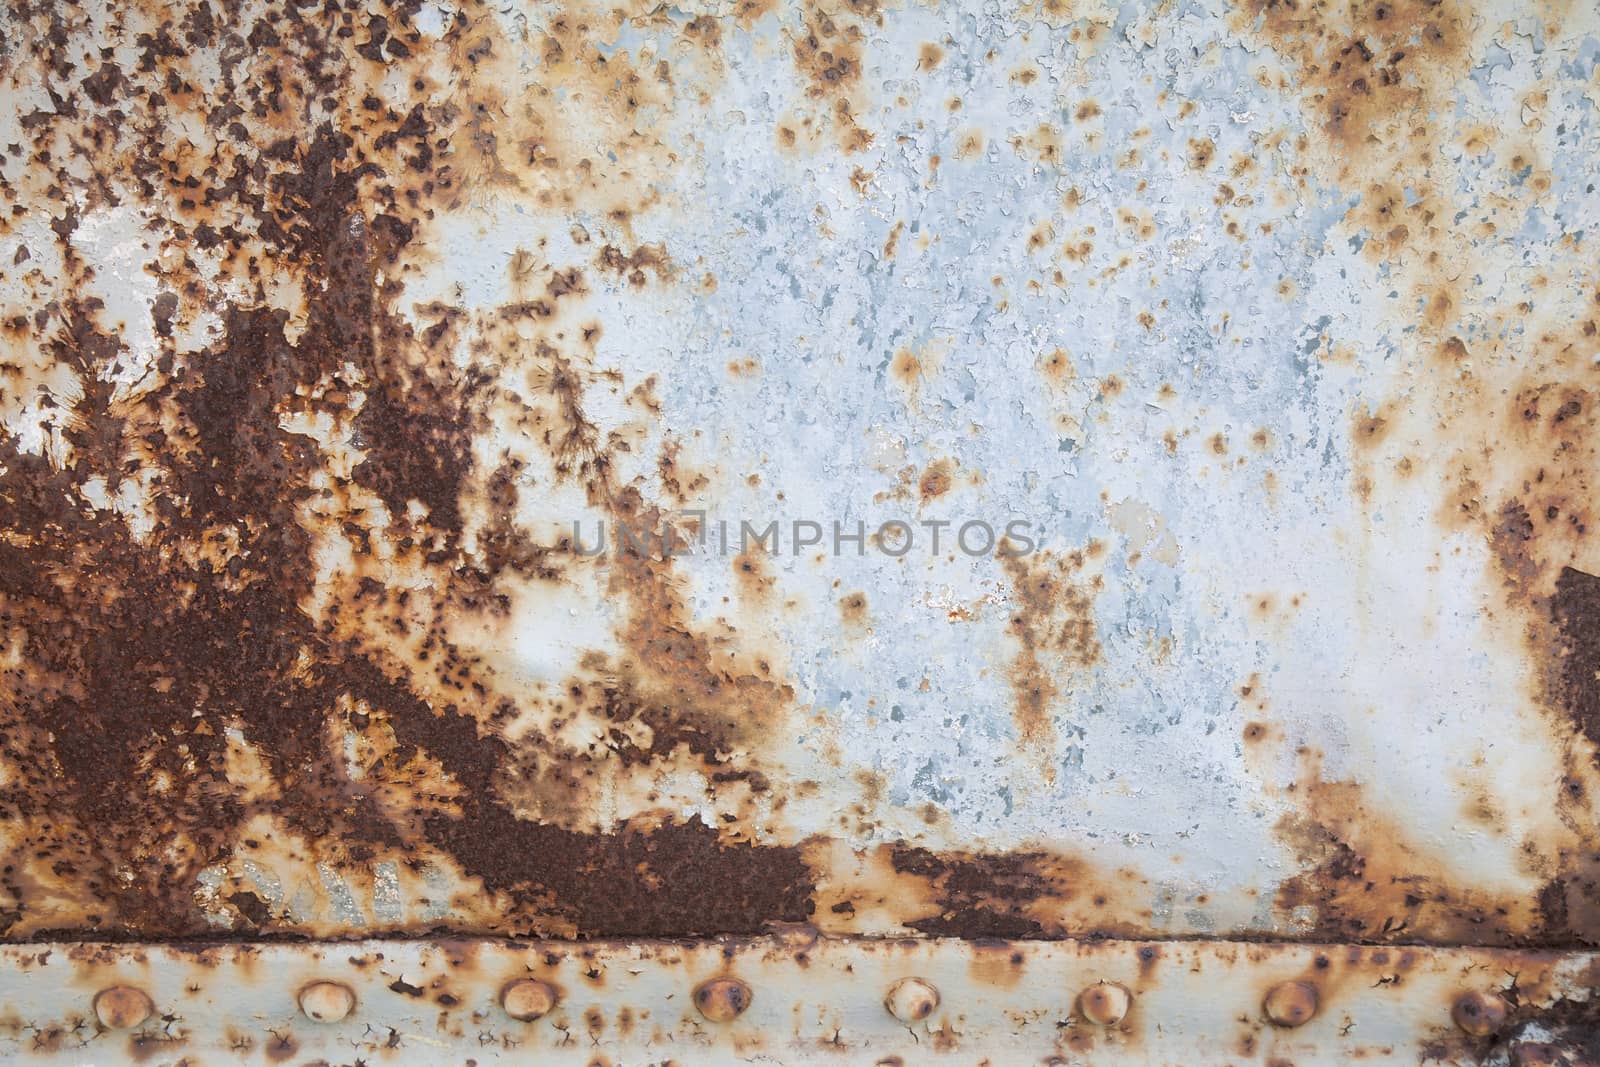 broken marble in the dark and warm colors marble background texture closeup,Broken color background